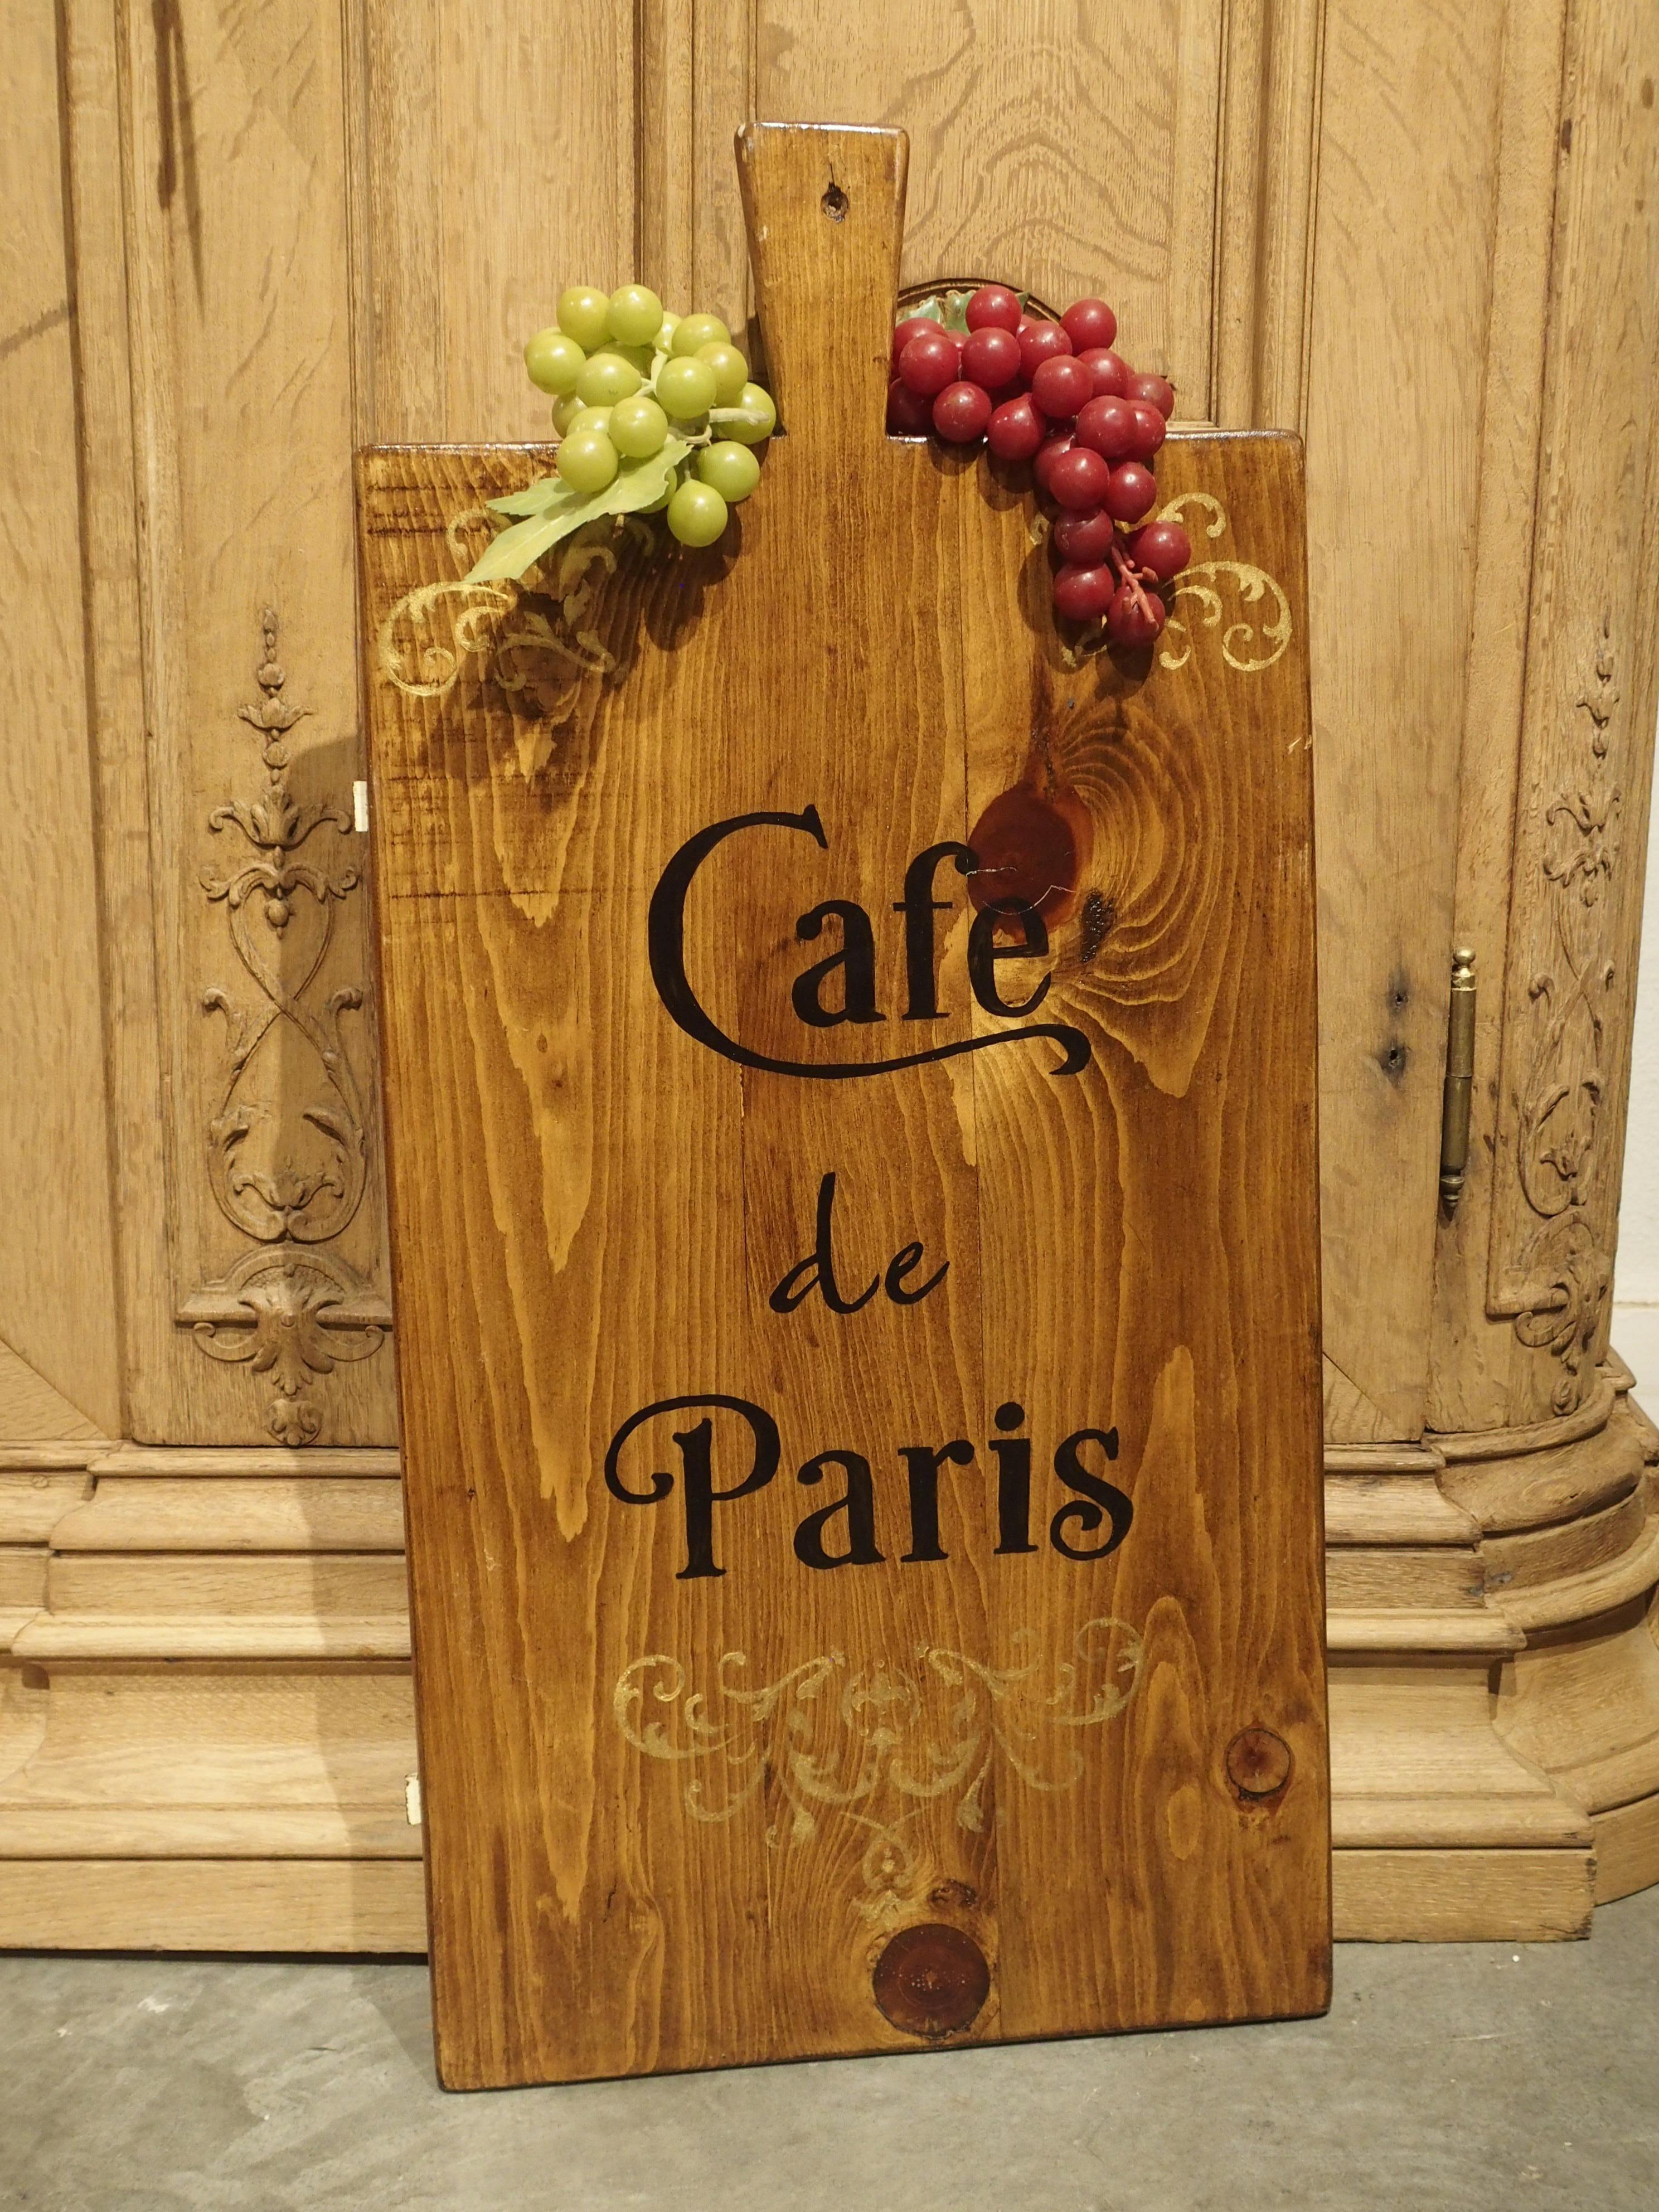 Hang this painted wooden board in the kitchen as decoration, and use it as a charcuterie and cheese board for when guests arrive. “Cafe de Paris” is hand painted in black letters, while the two upper corners and lower section has painted scrollwork